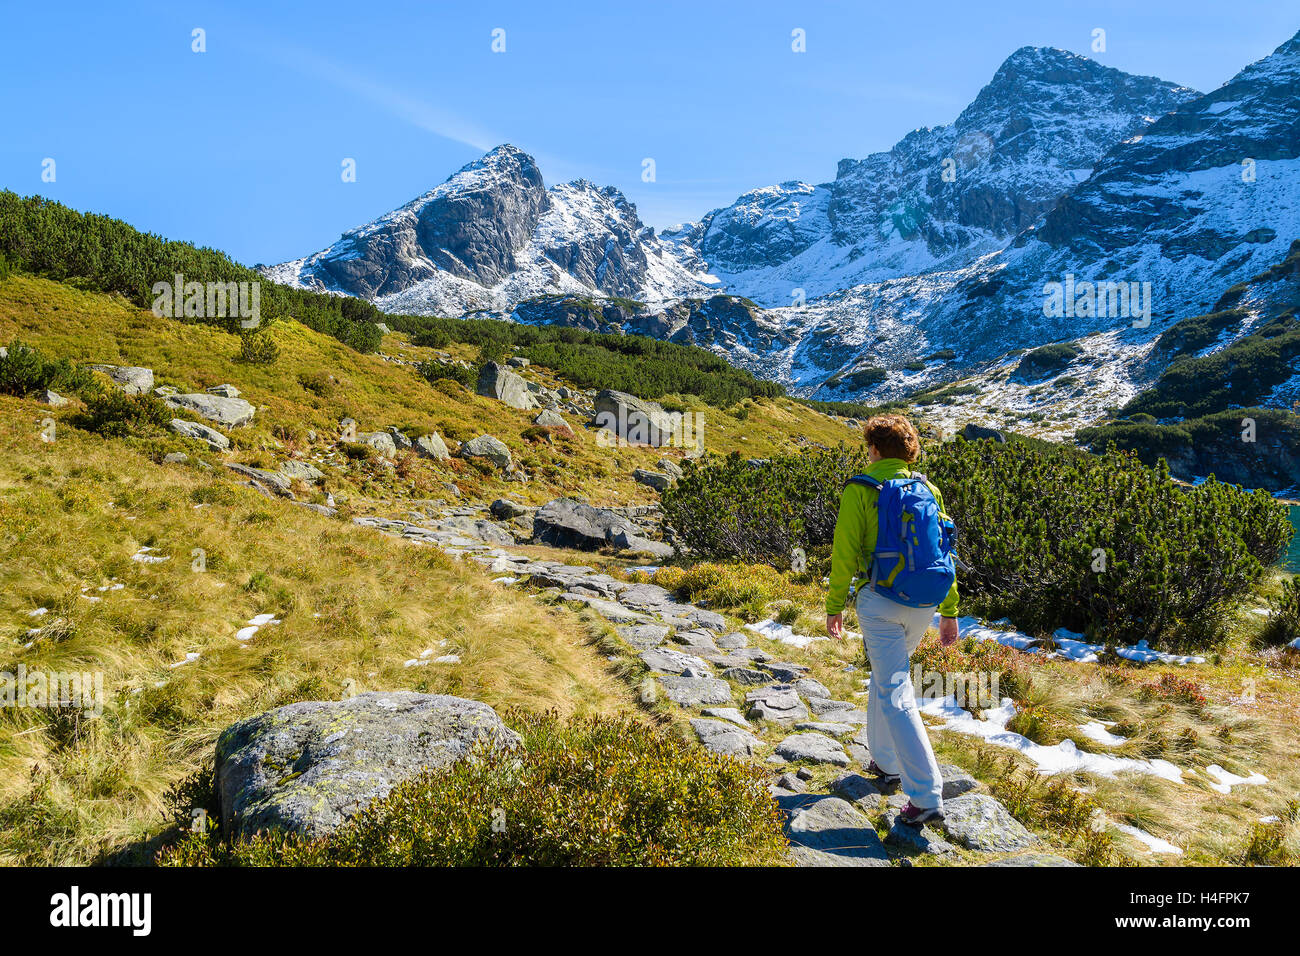 Young woman backpacker walking on mountain trail in Gasienicowa valley in autumn season, High Tatra Mountains, Poland Stock Photo